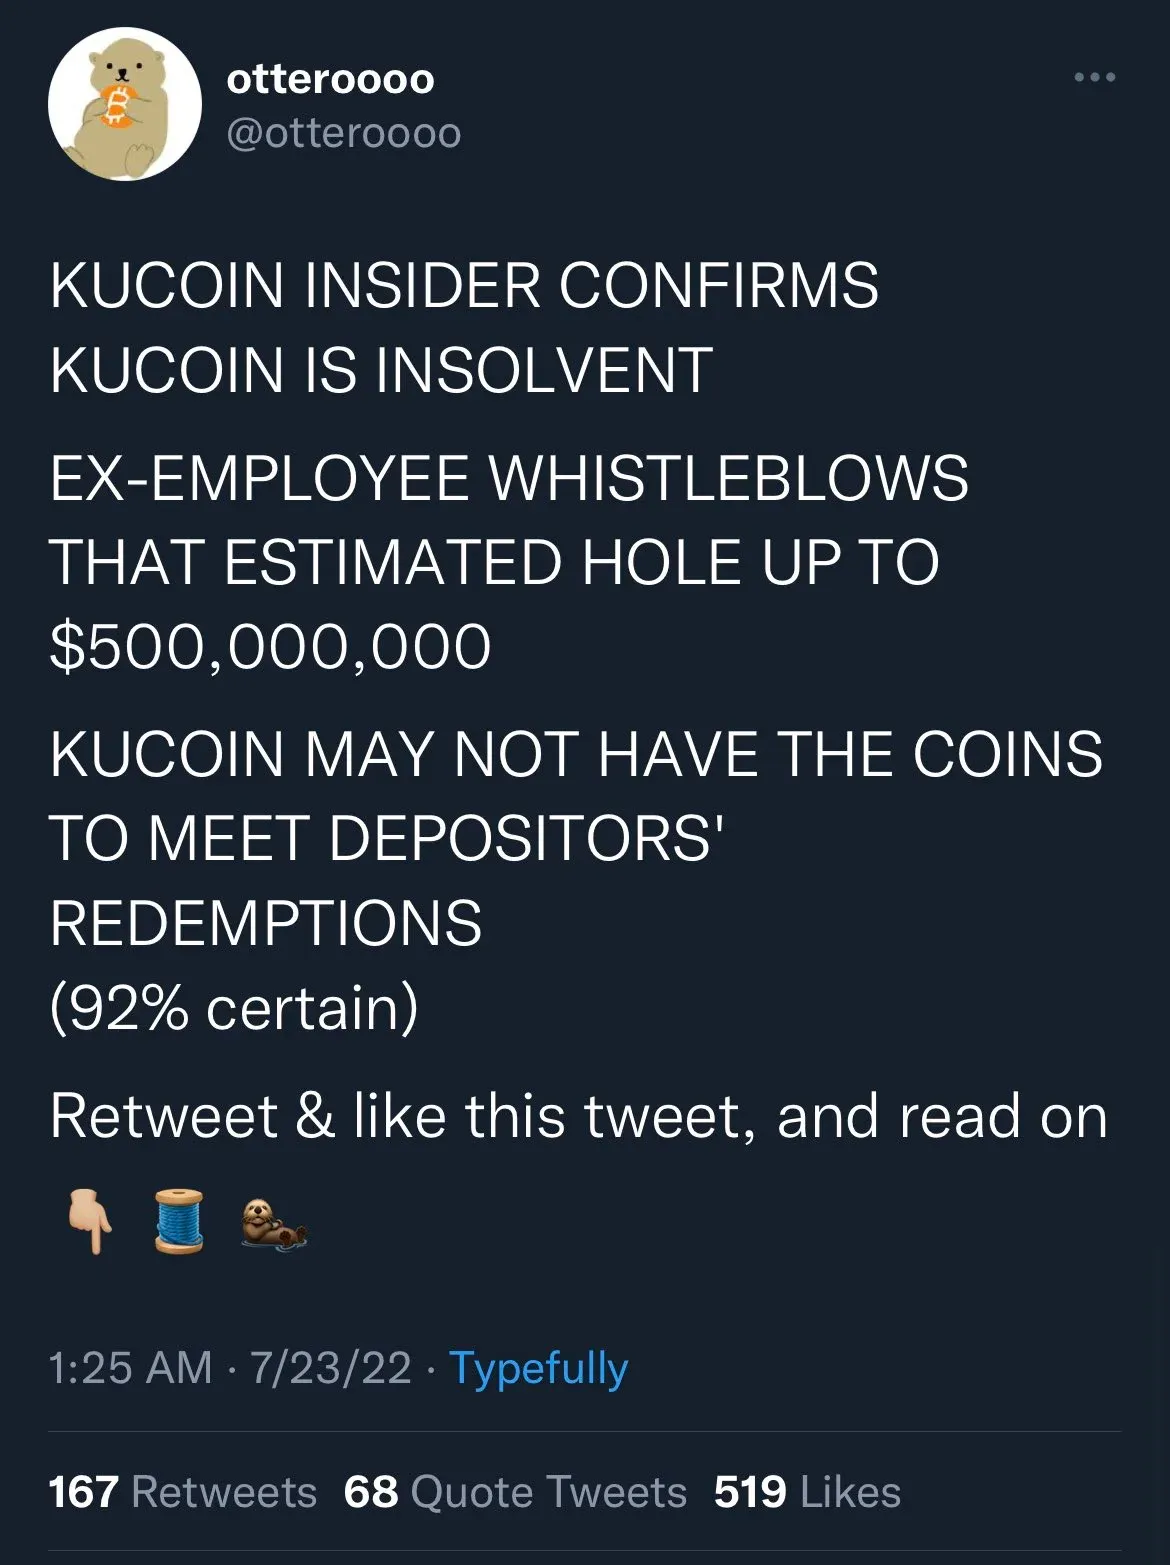 @otterooo's deleted tweet accusing KuCoin of being insolvent